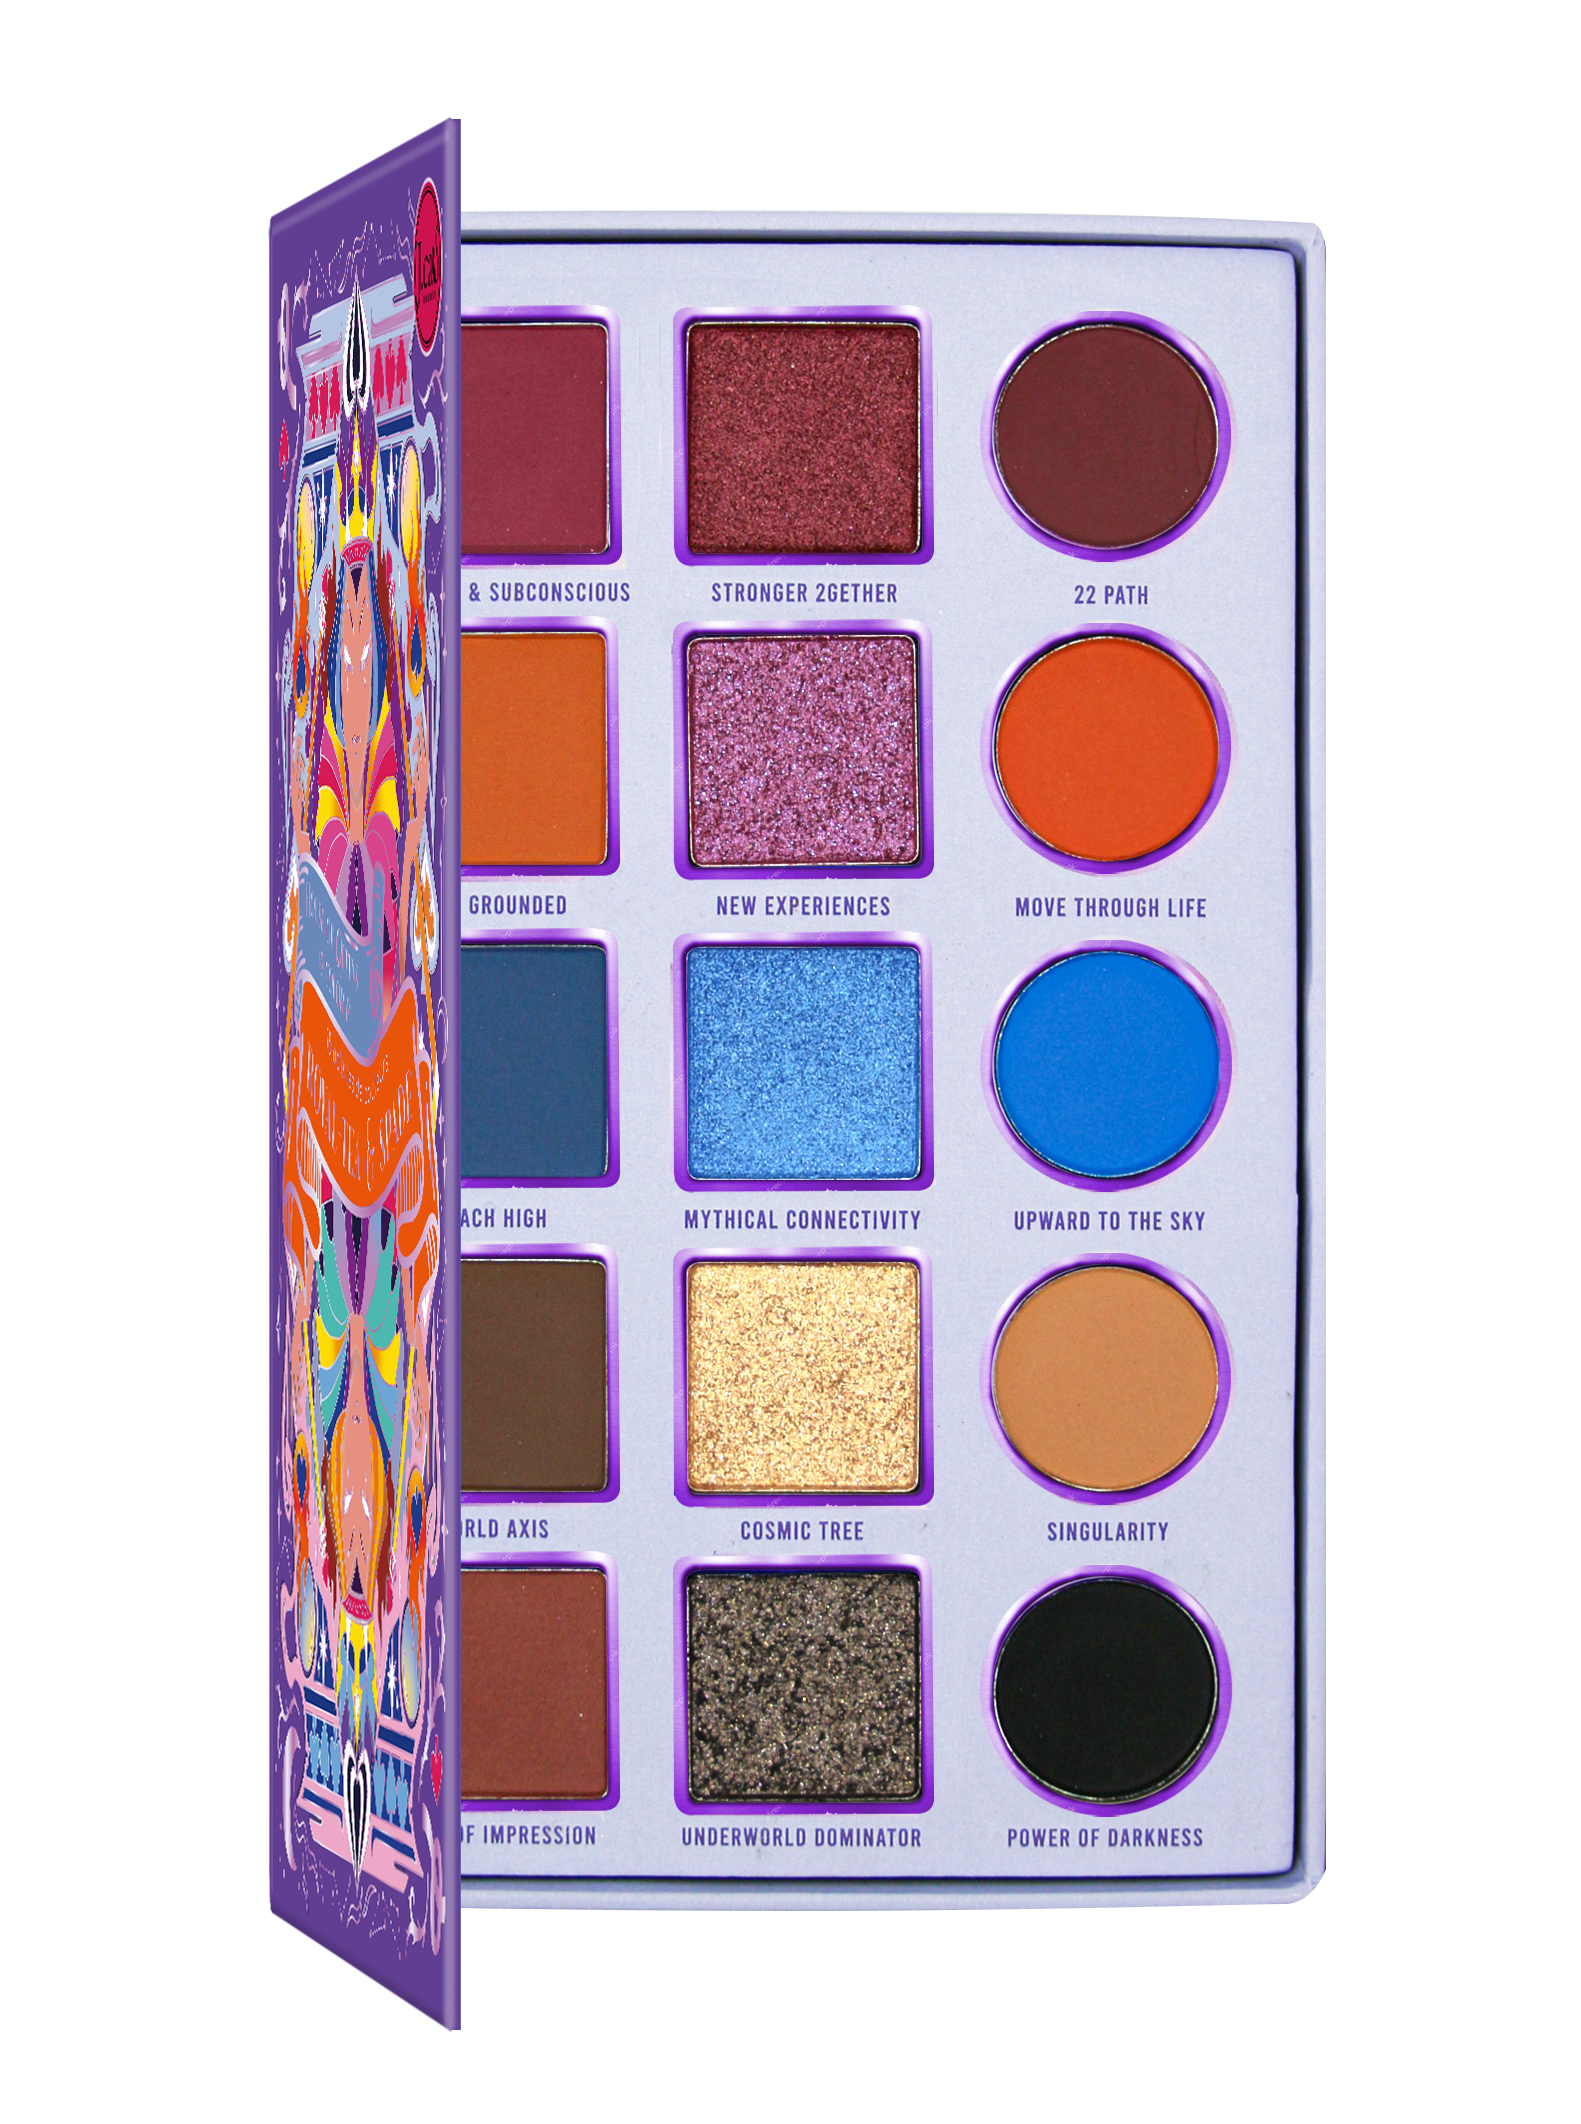  Eyeshadow palette with 15 shades